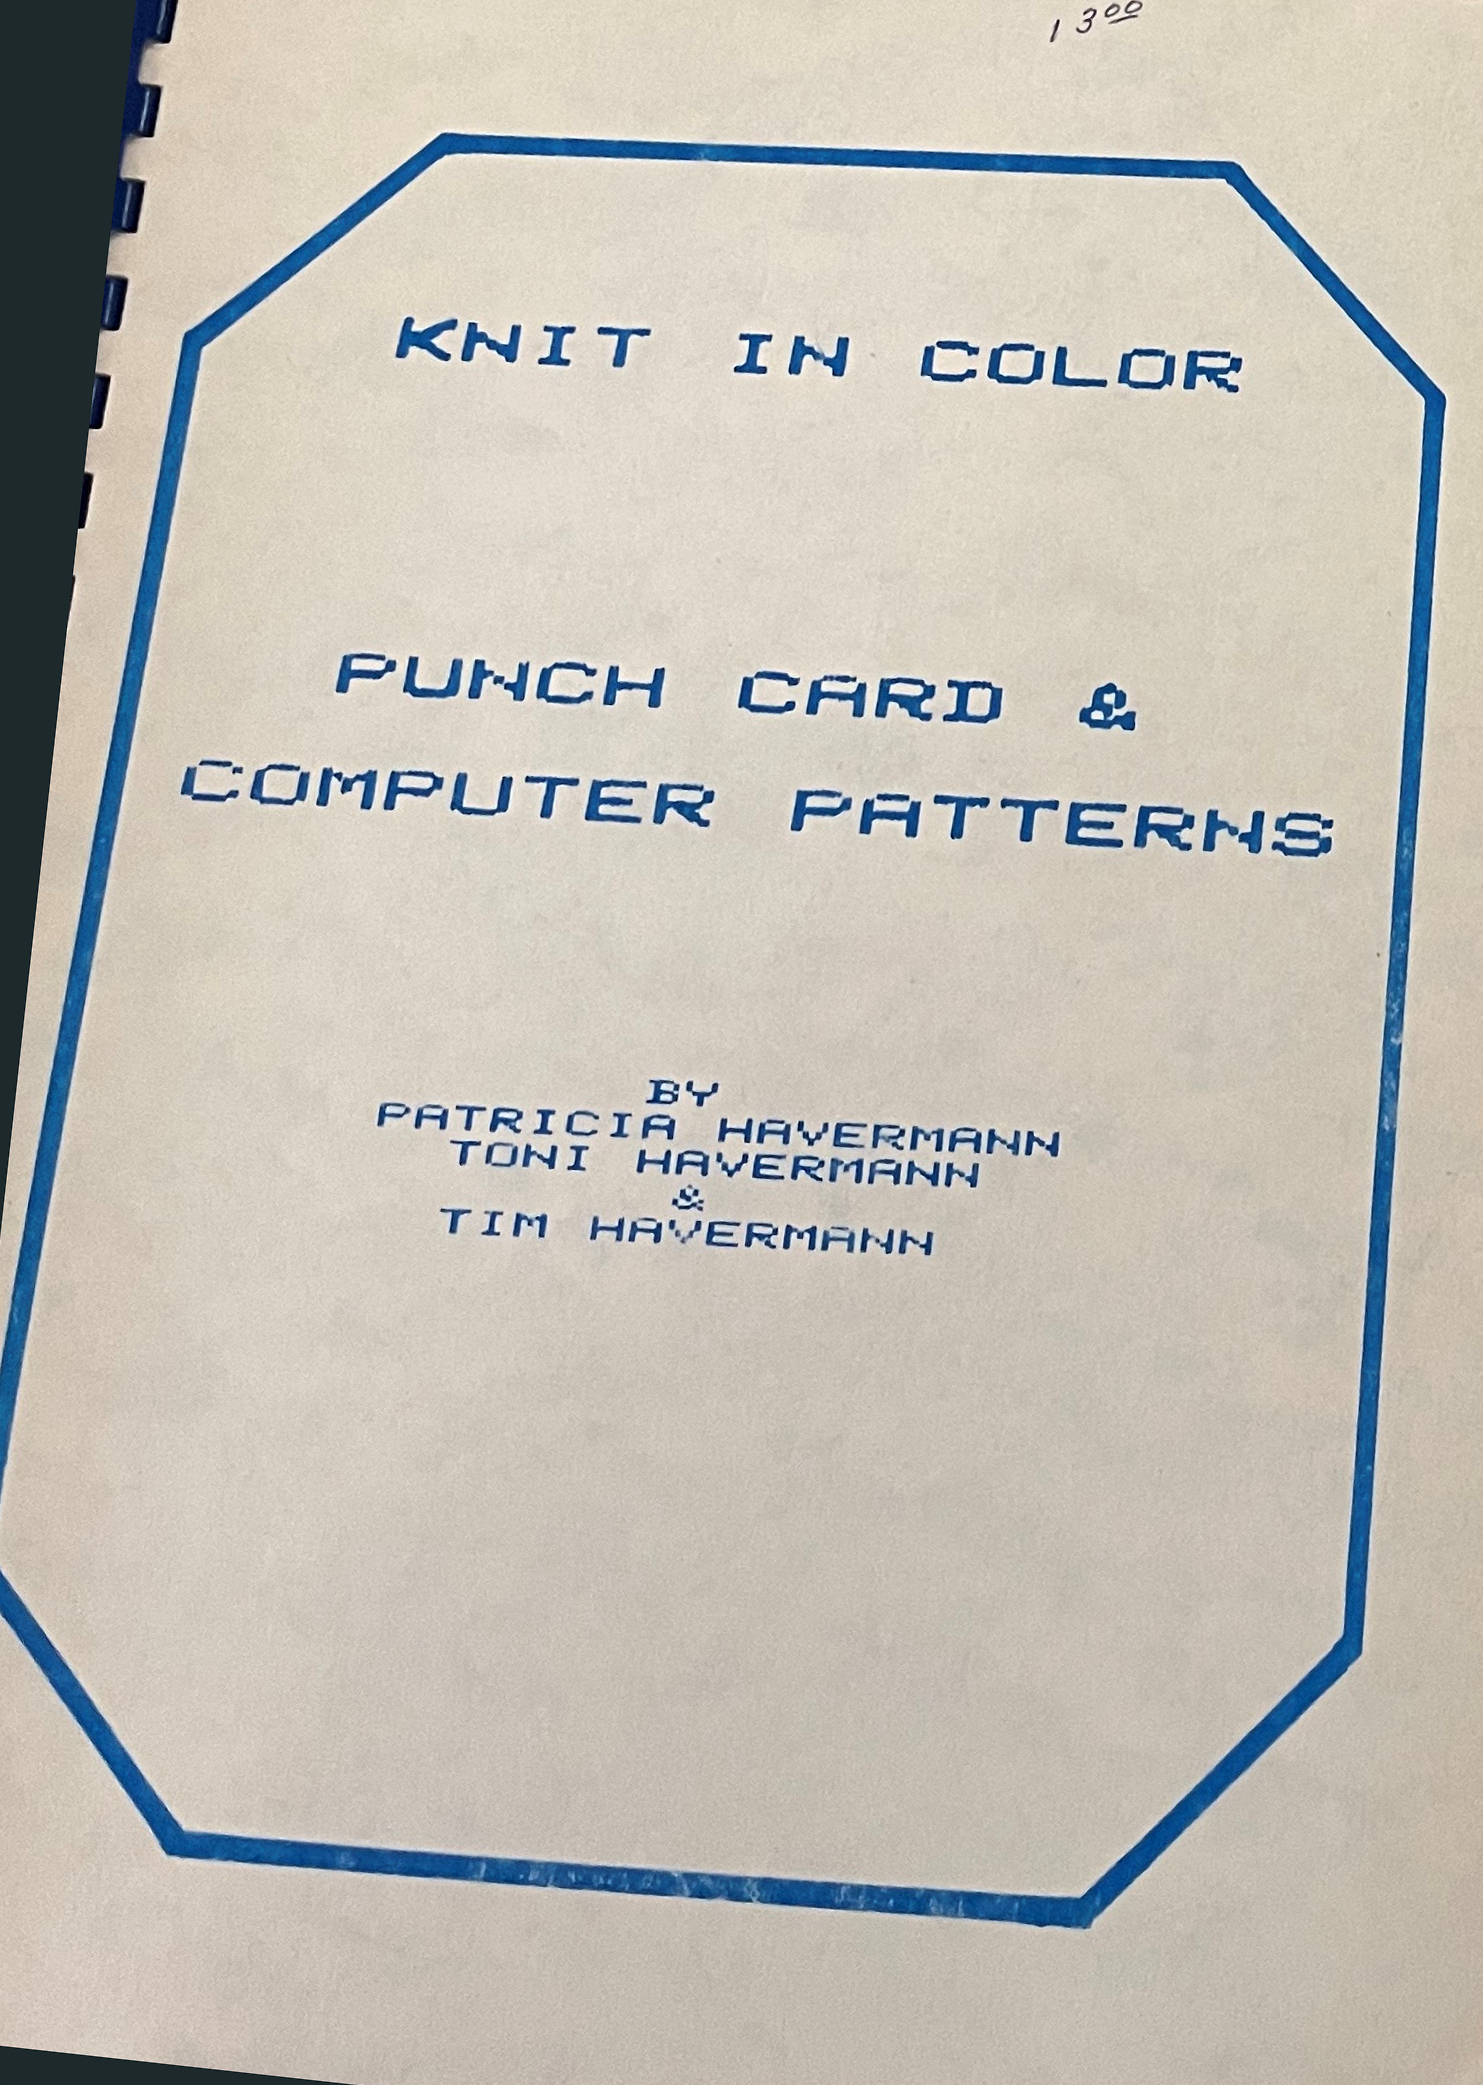 Knit In Color:  Punch Card & Computer Patterns